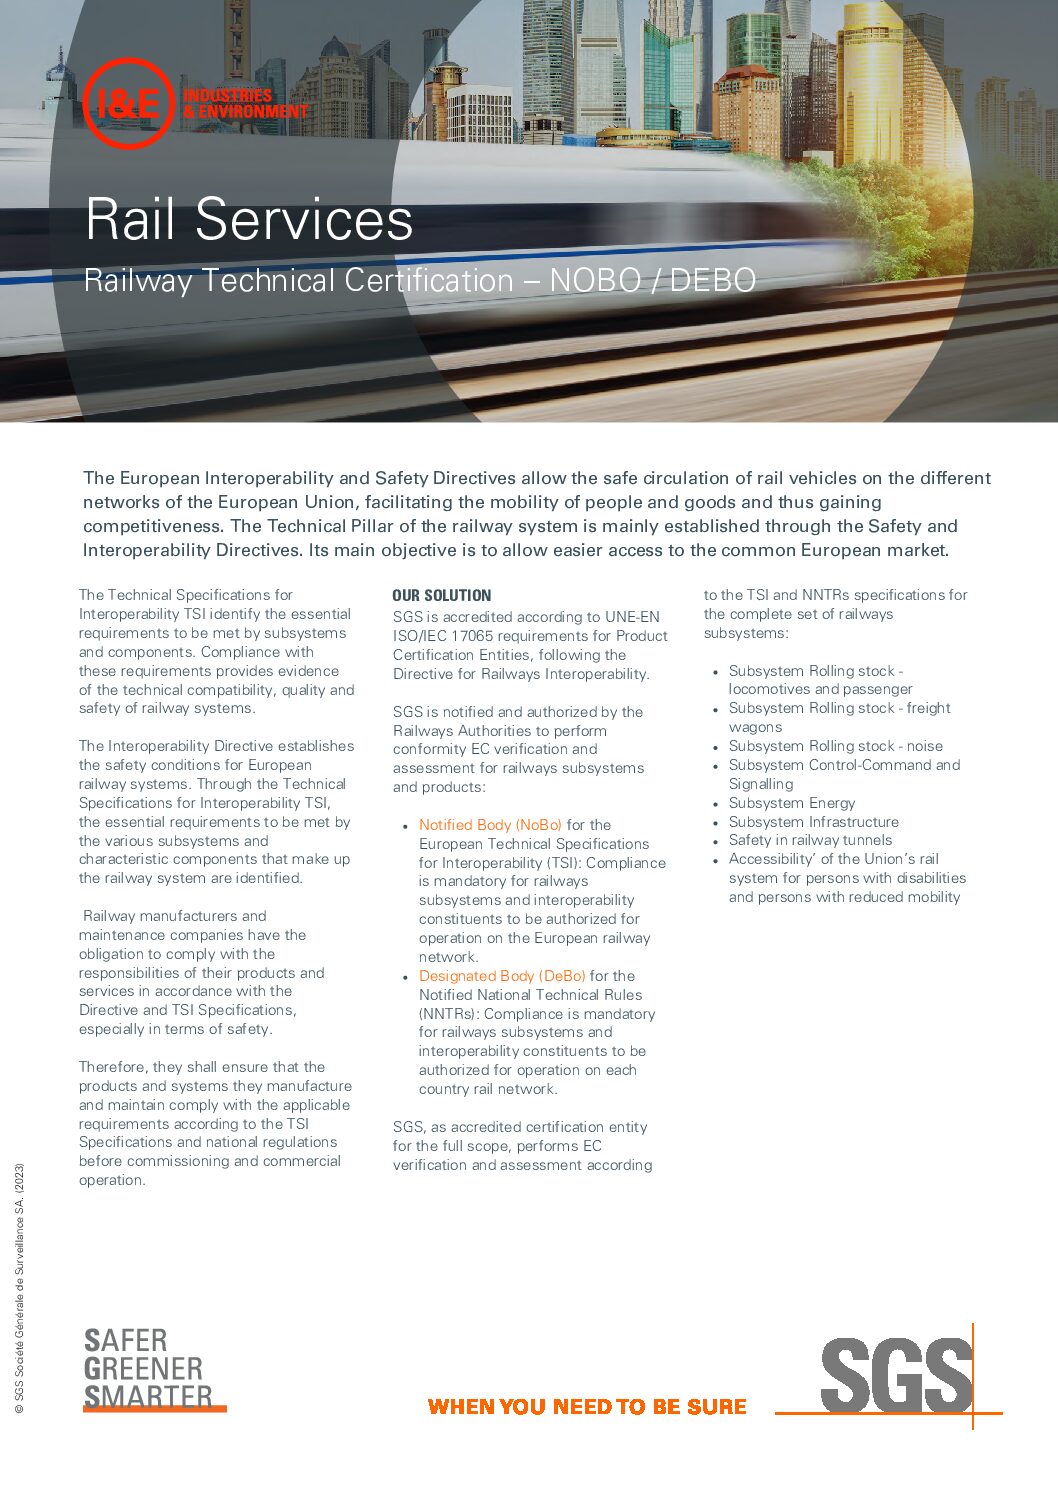 Rail Services – Railway Technical Certification